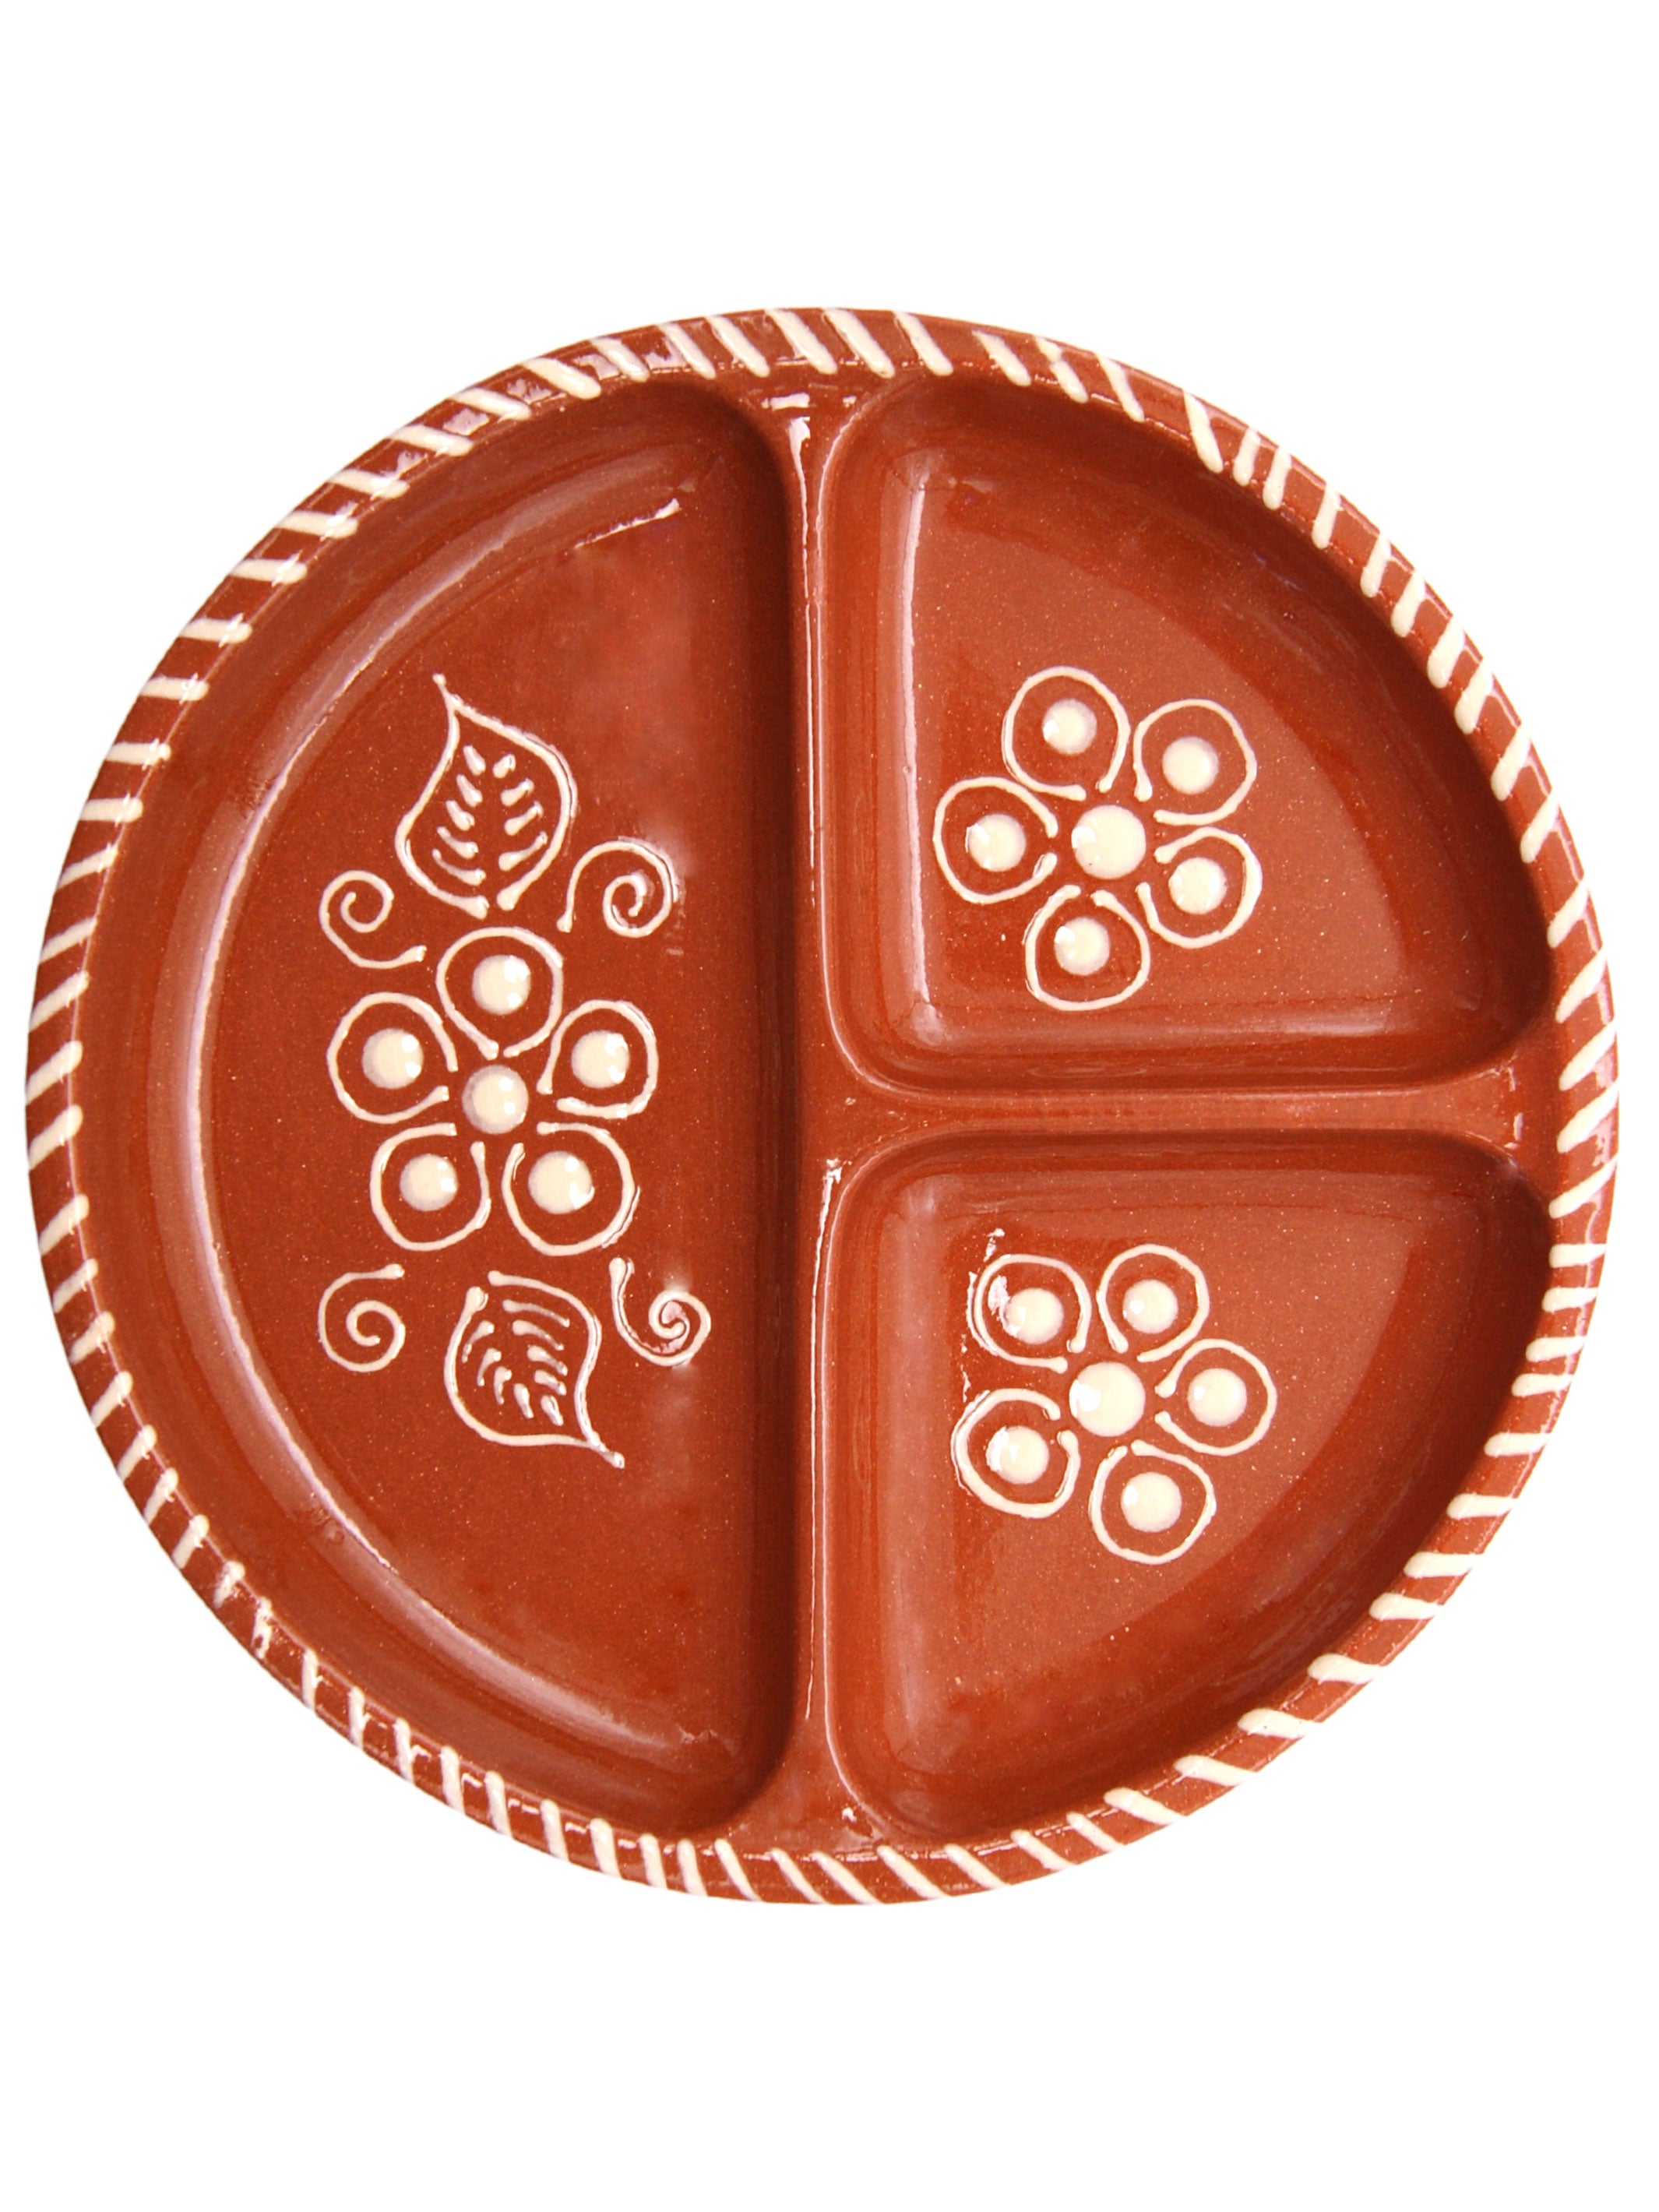 Portuguese Pottery Terracotta Glazed Clay Divided Appetizer Dish